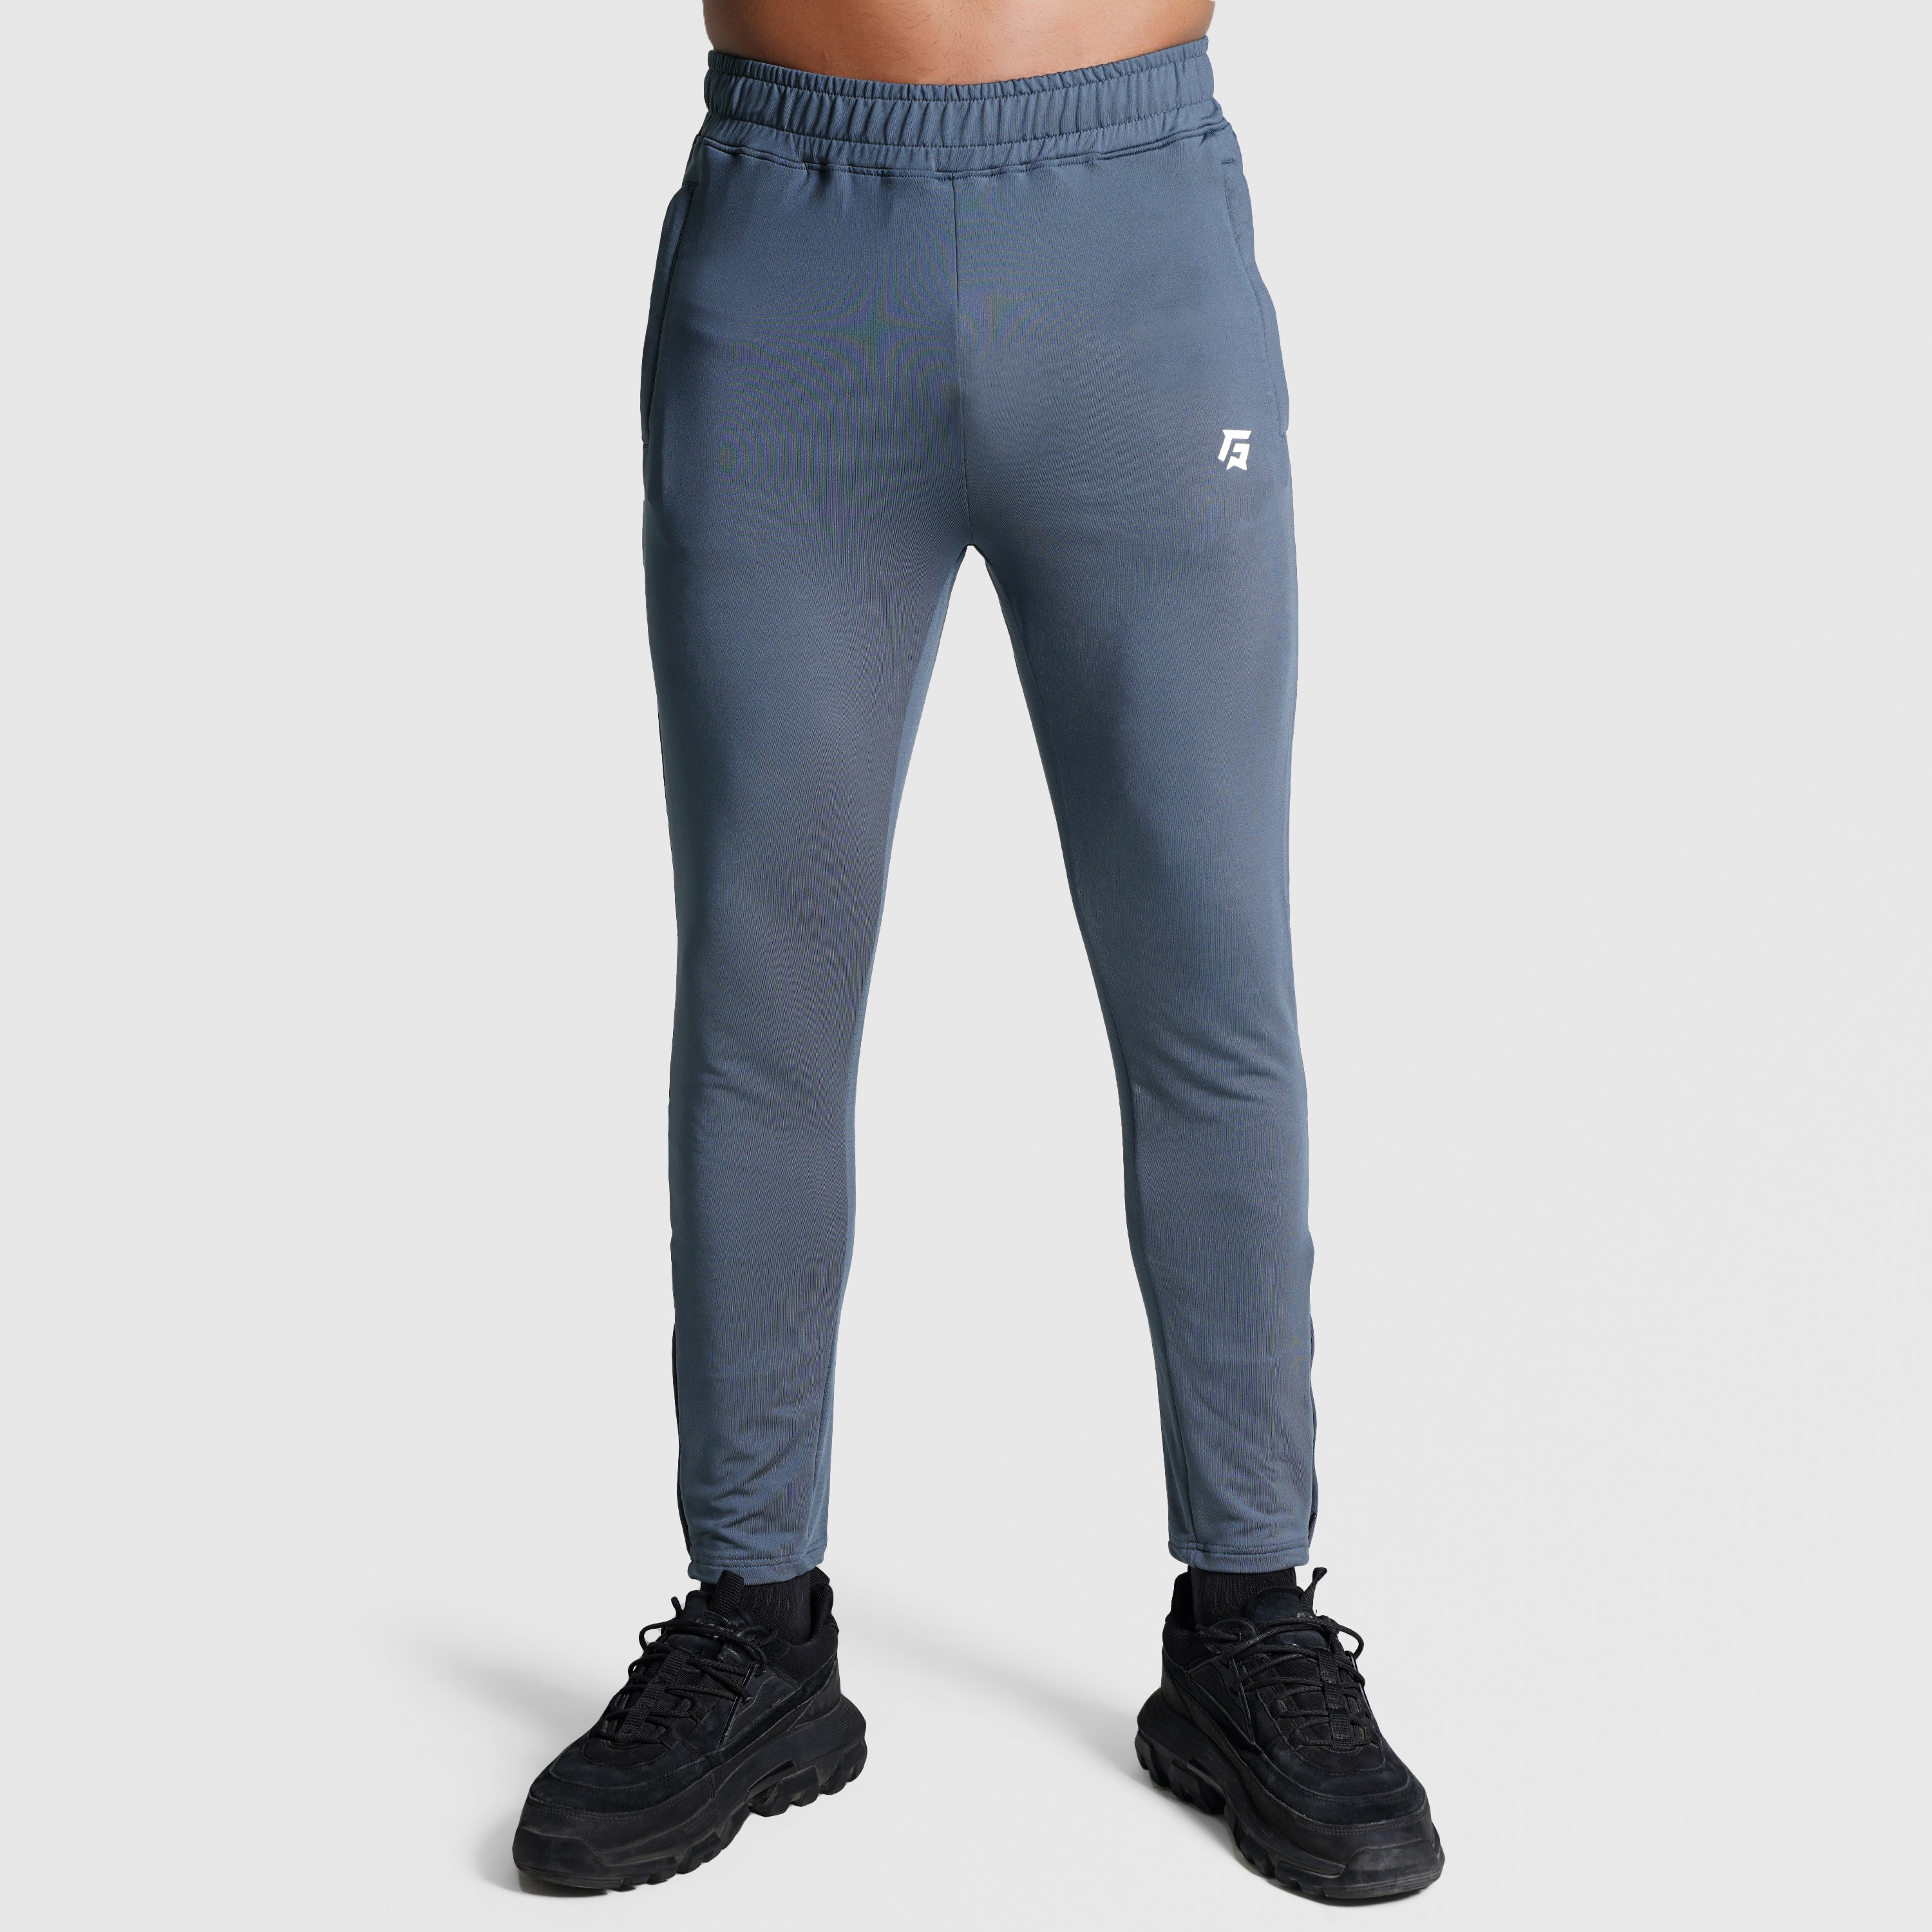 Lite Fit Trousers (Grey)